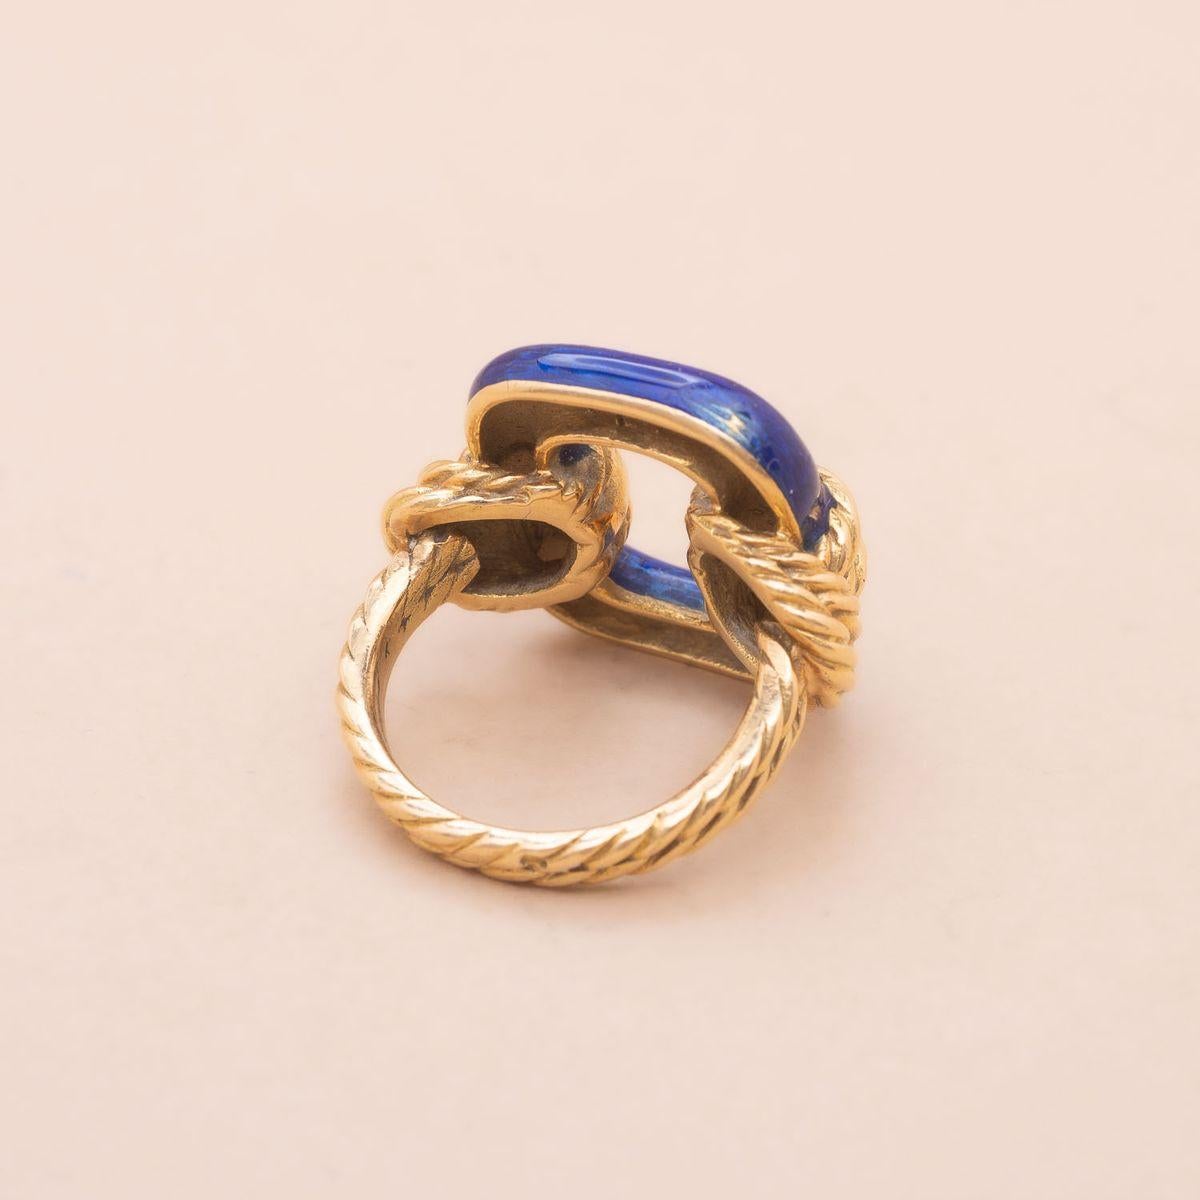 Women's Vintage 1970s Enamel and Gold Ring attributed to Fred Paris